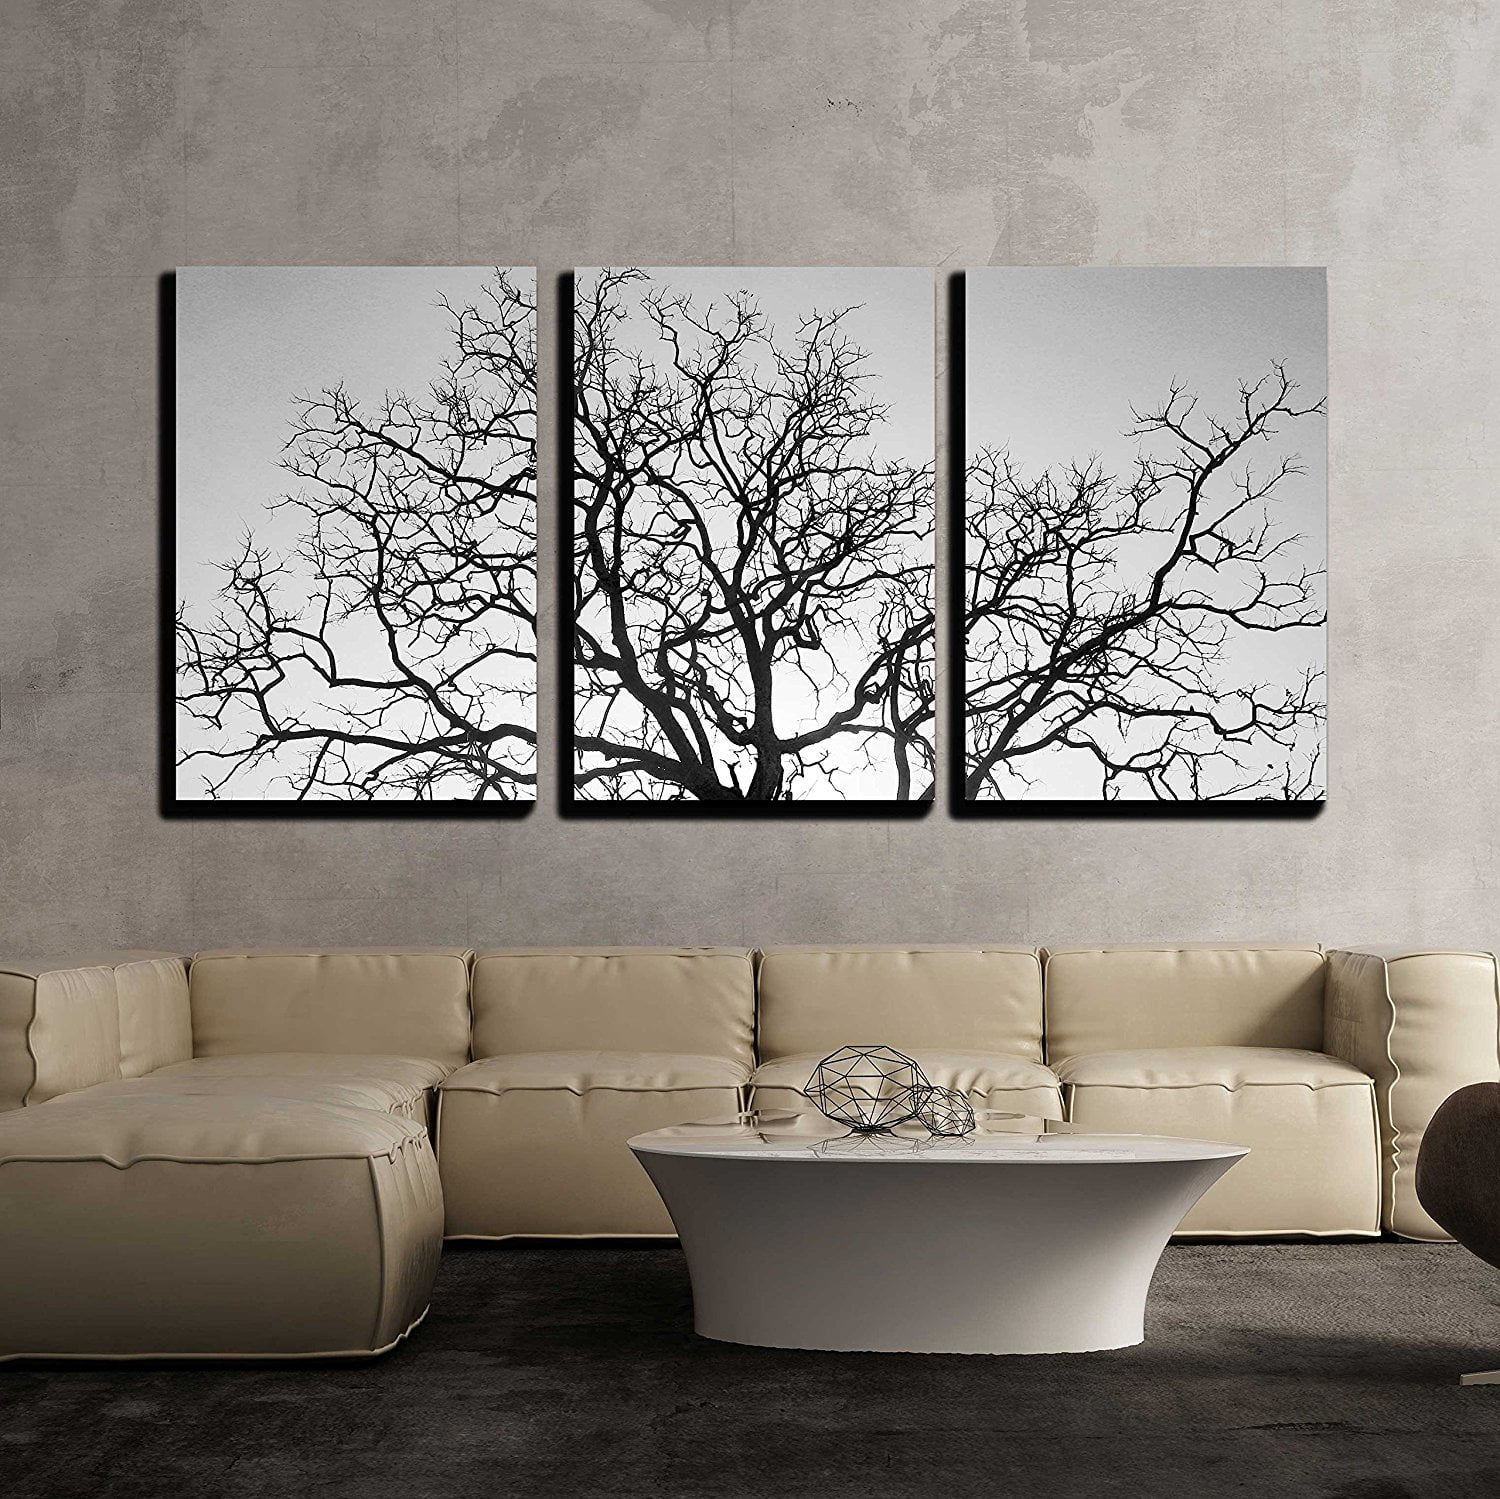 Large Autumn Forest Tree Canvas Print Wall Art Framed Ready to Hang Home Decor 